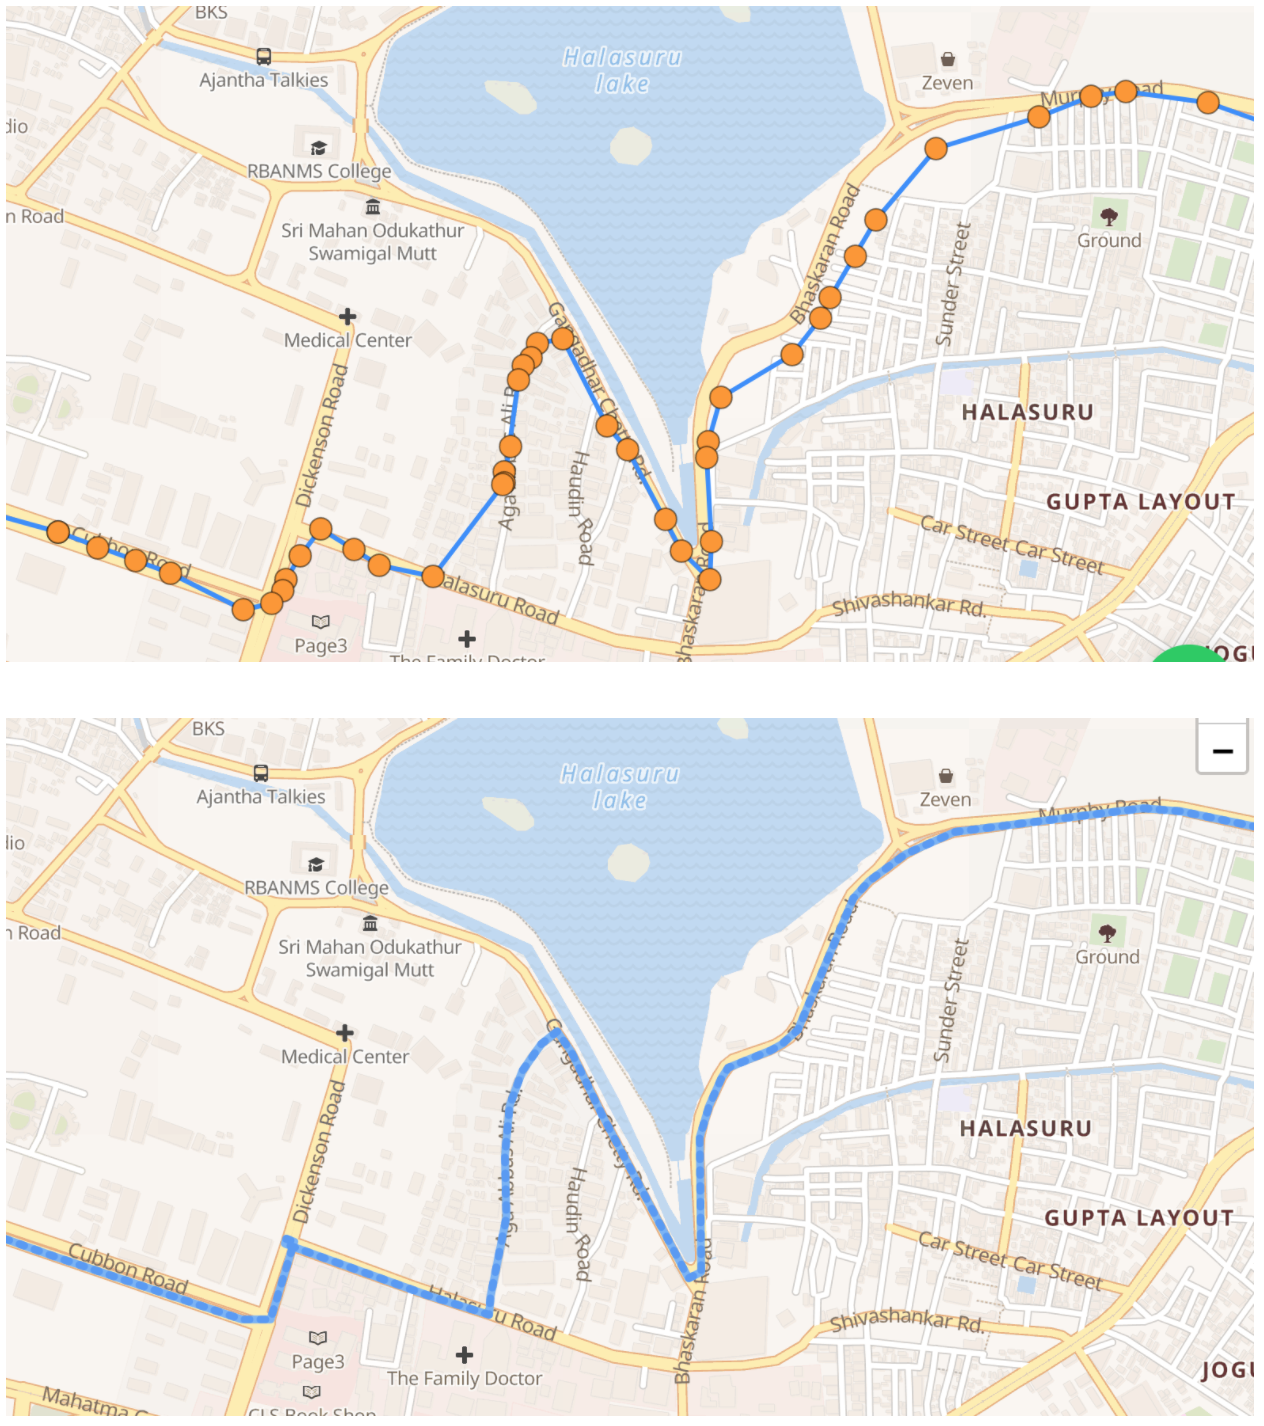 Location points are mapped to road and user's actual path is predicted based on the assumption that they were driving